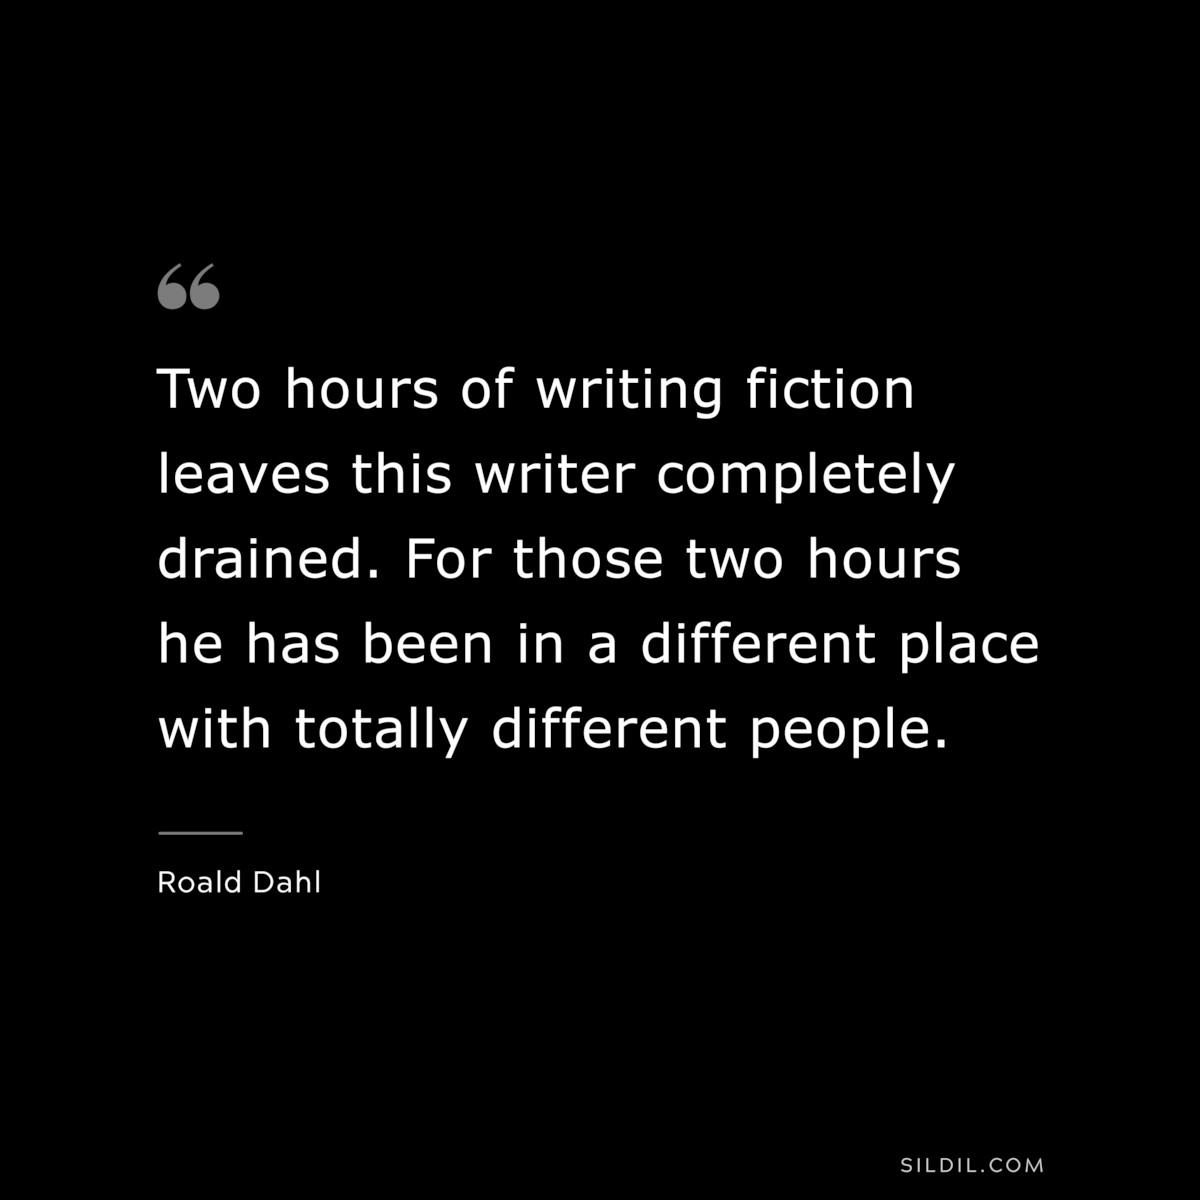 Two hours of writing fiction leaves this writer completely drained. For those two hours he has been in a different place with totally different people. ― Roald Dahl